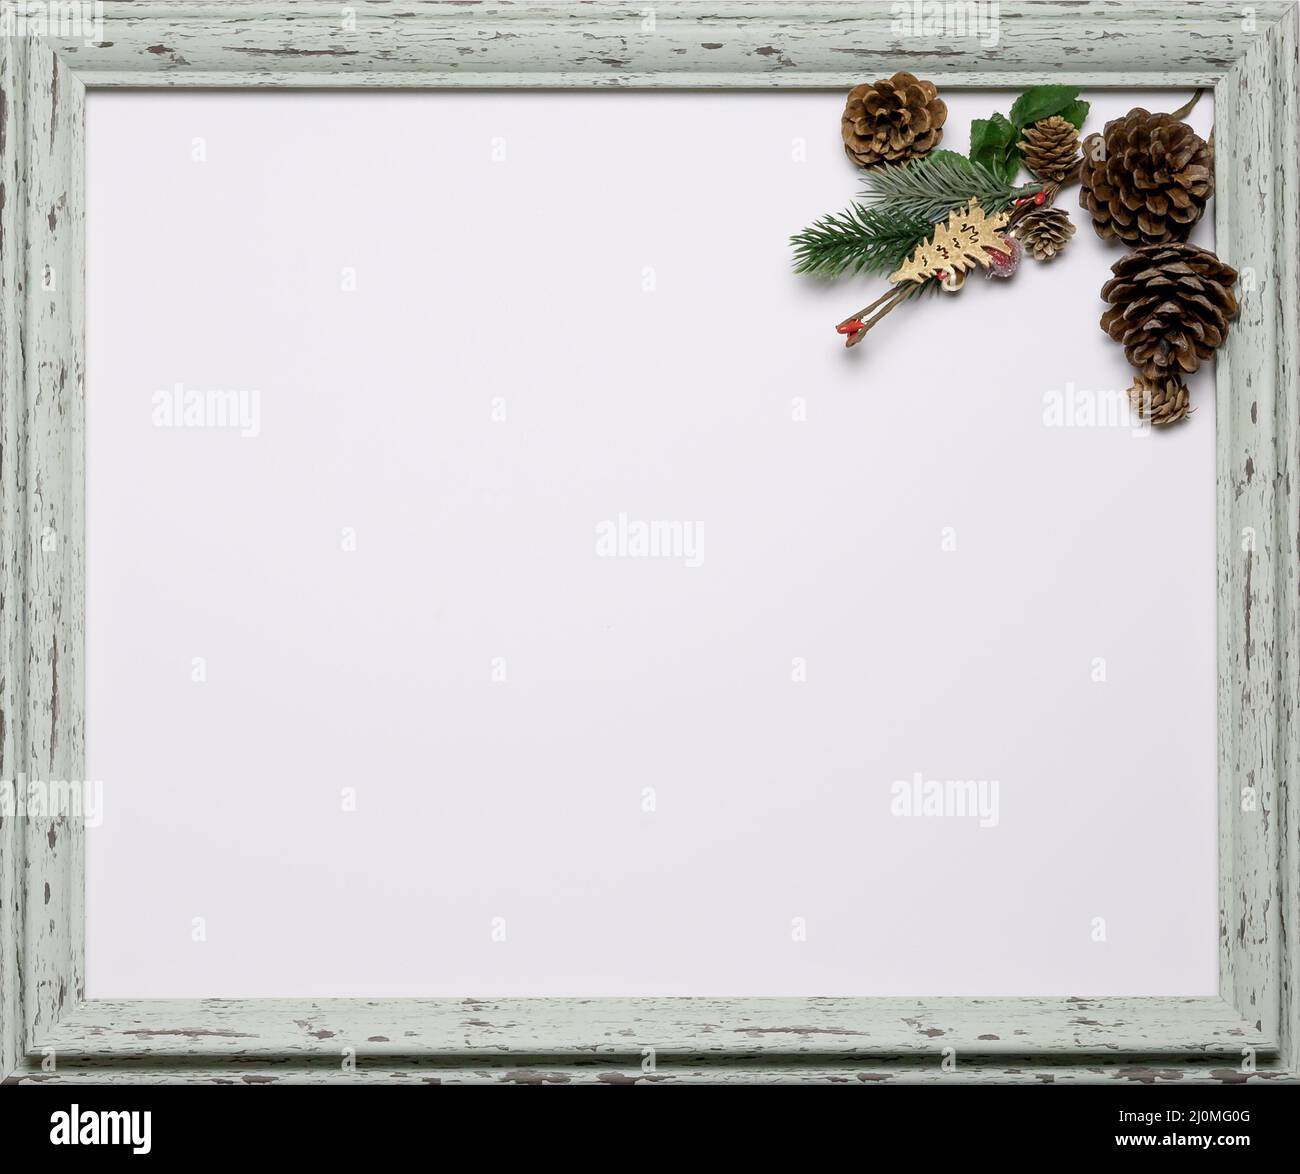 Blank Christmas themed card with a place for an inscription, framed in a decorative frame. Festive mockup. Flatlay composition Stock Photo